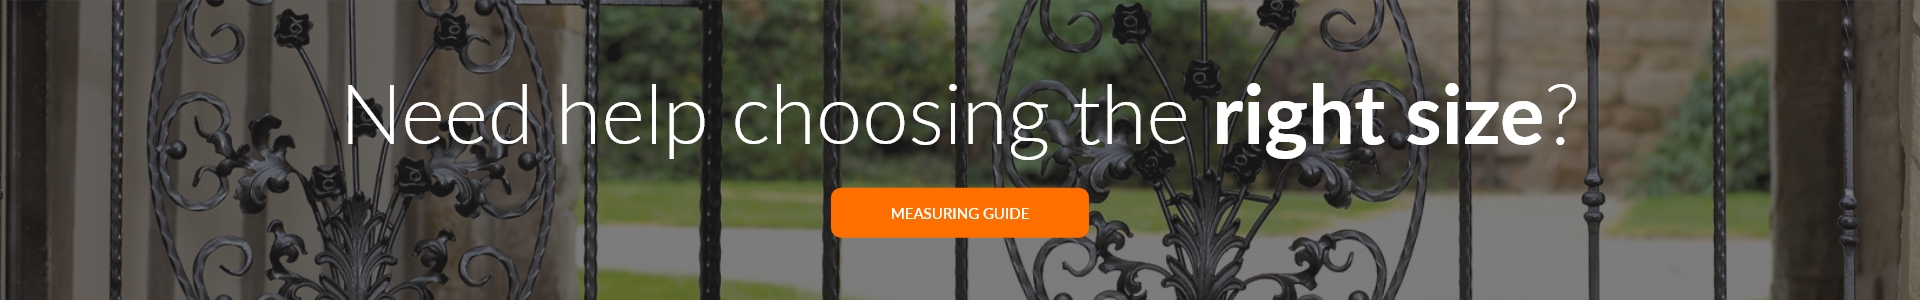 Need help with sizes? View the measuring guide here